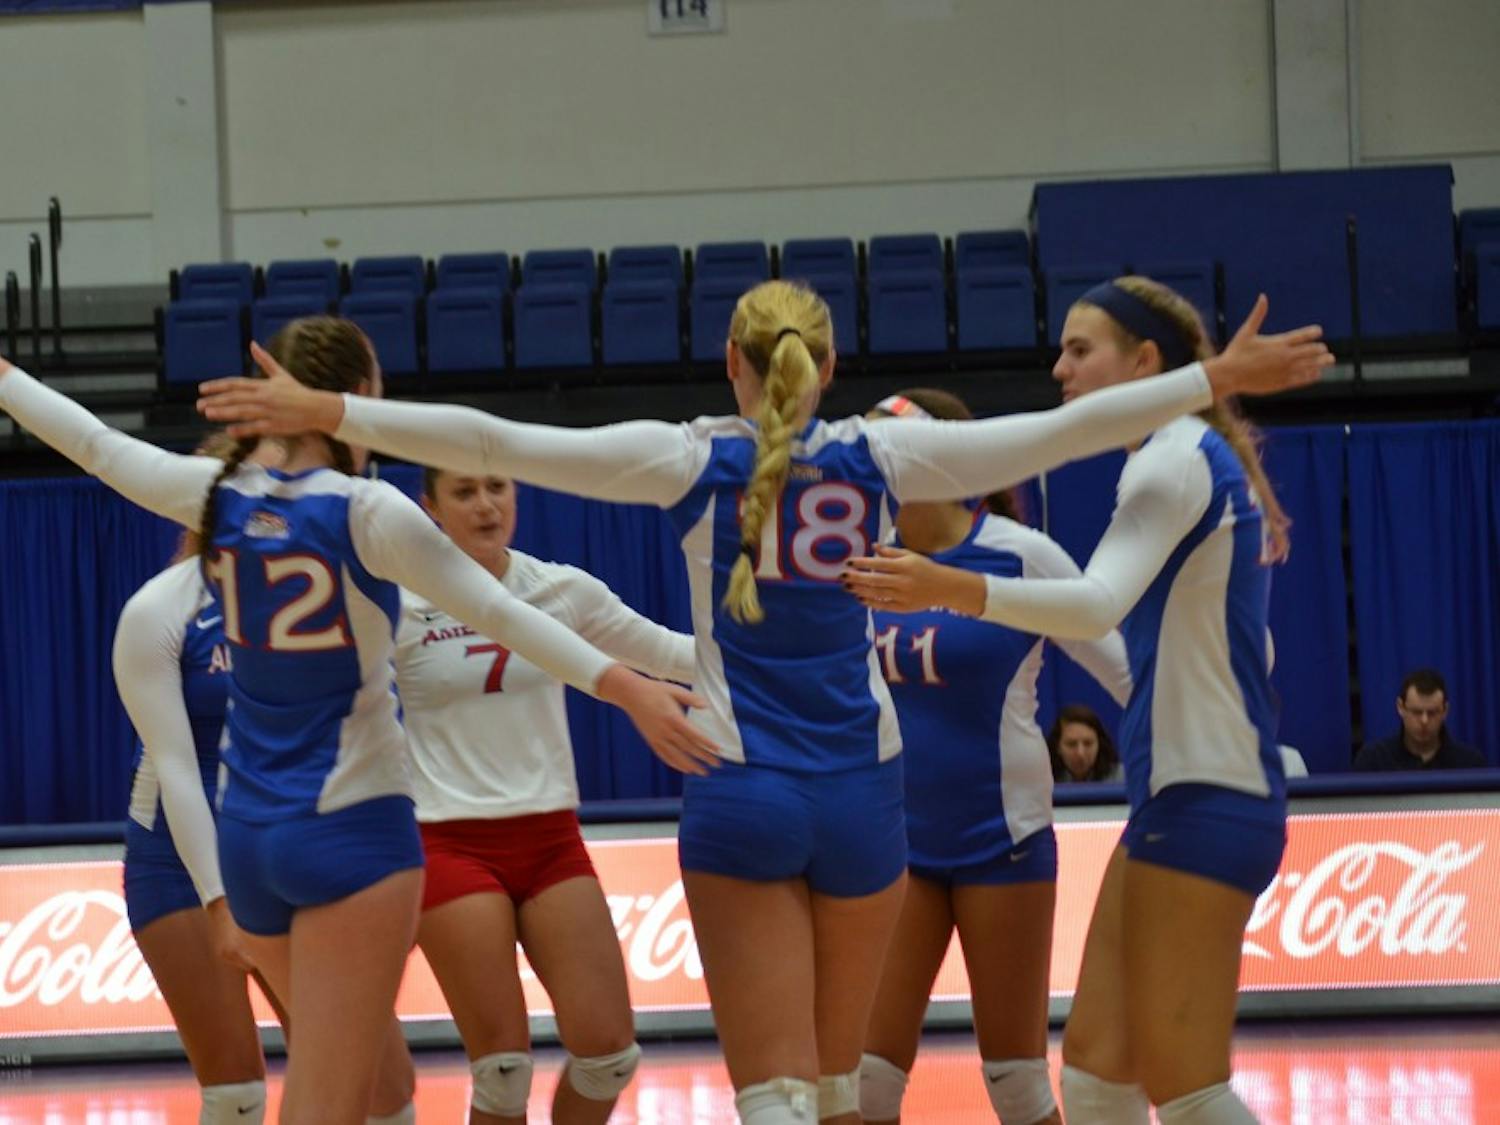 Julita Kurdziuk, center, is now the lone senior on the women's volleyball team, and hopes to lead the team to the NCAA tournament again this year.